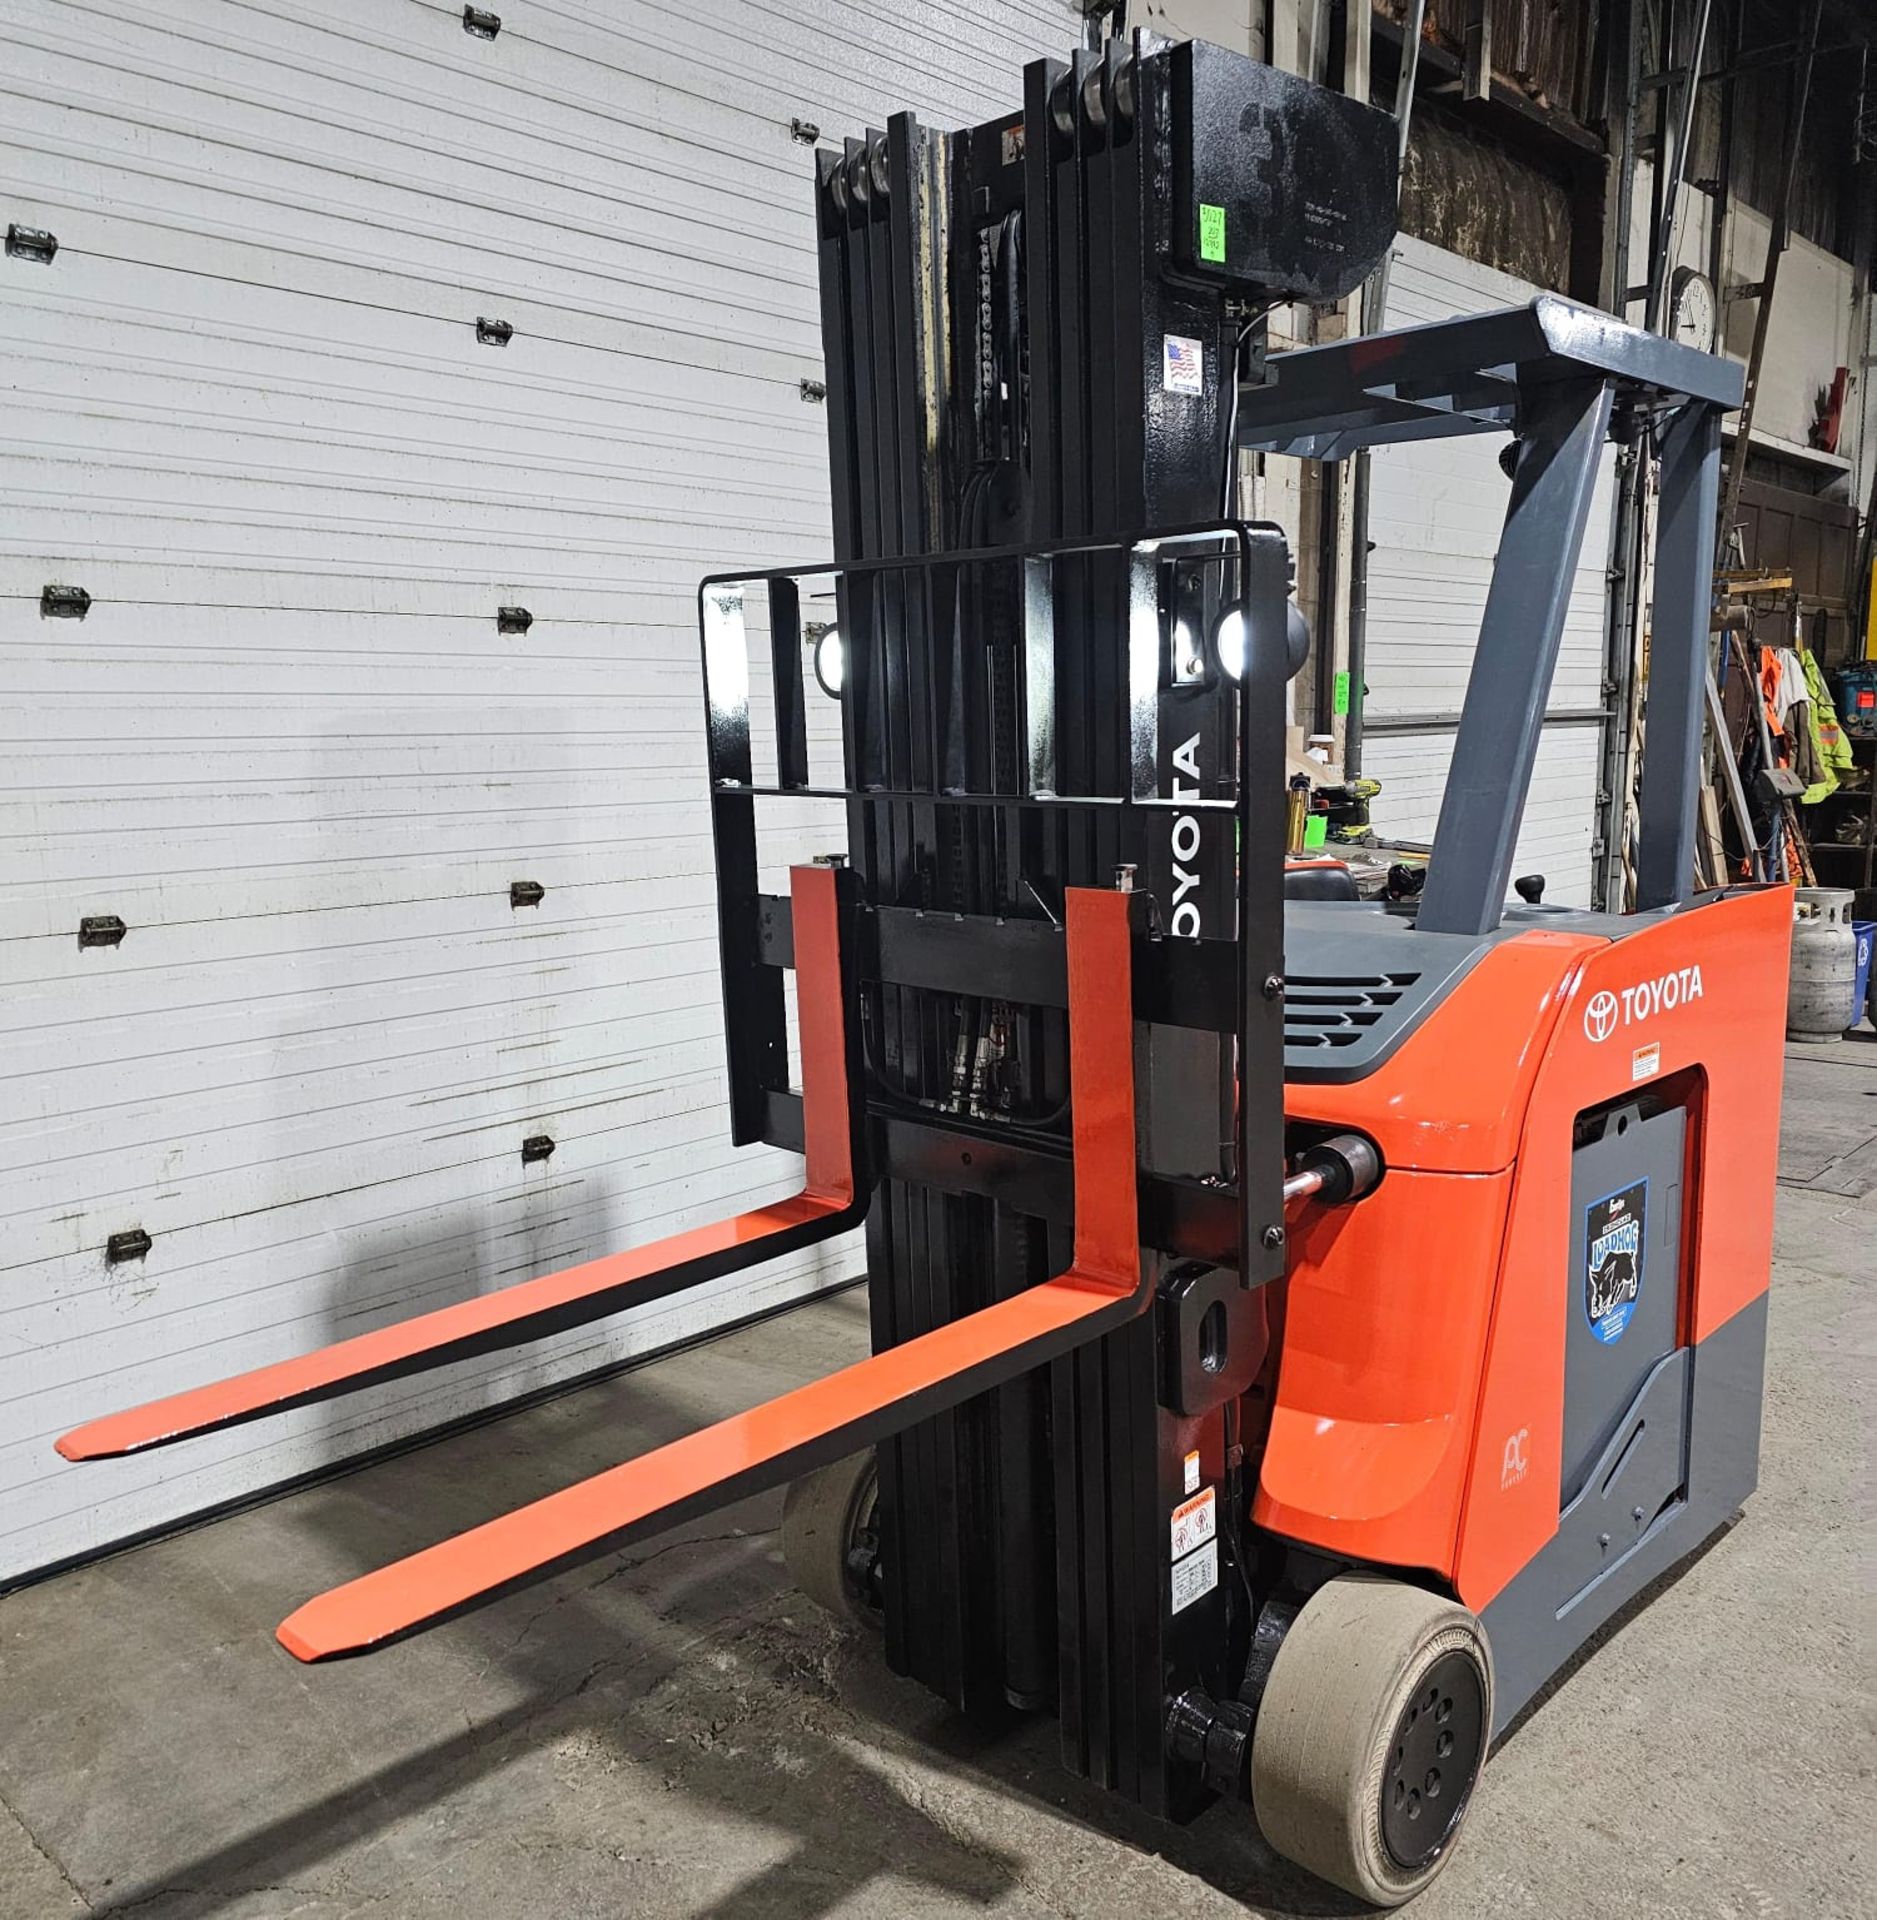 2017 Toyota 4,000lbs Capacity Electric Forklift with 4-STAGE Mast, 276" load height sideshift - Image 5 of 7